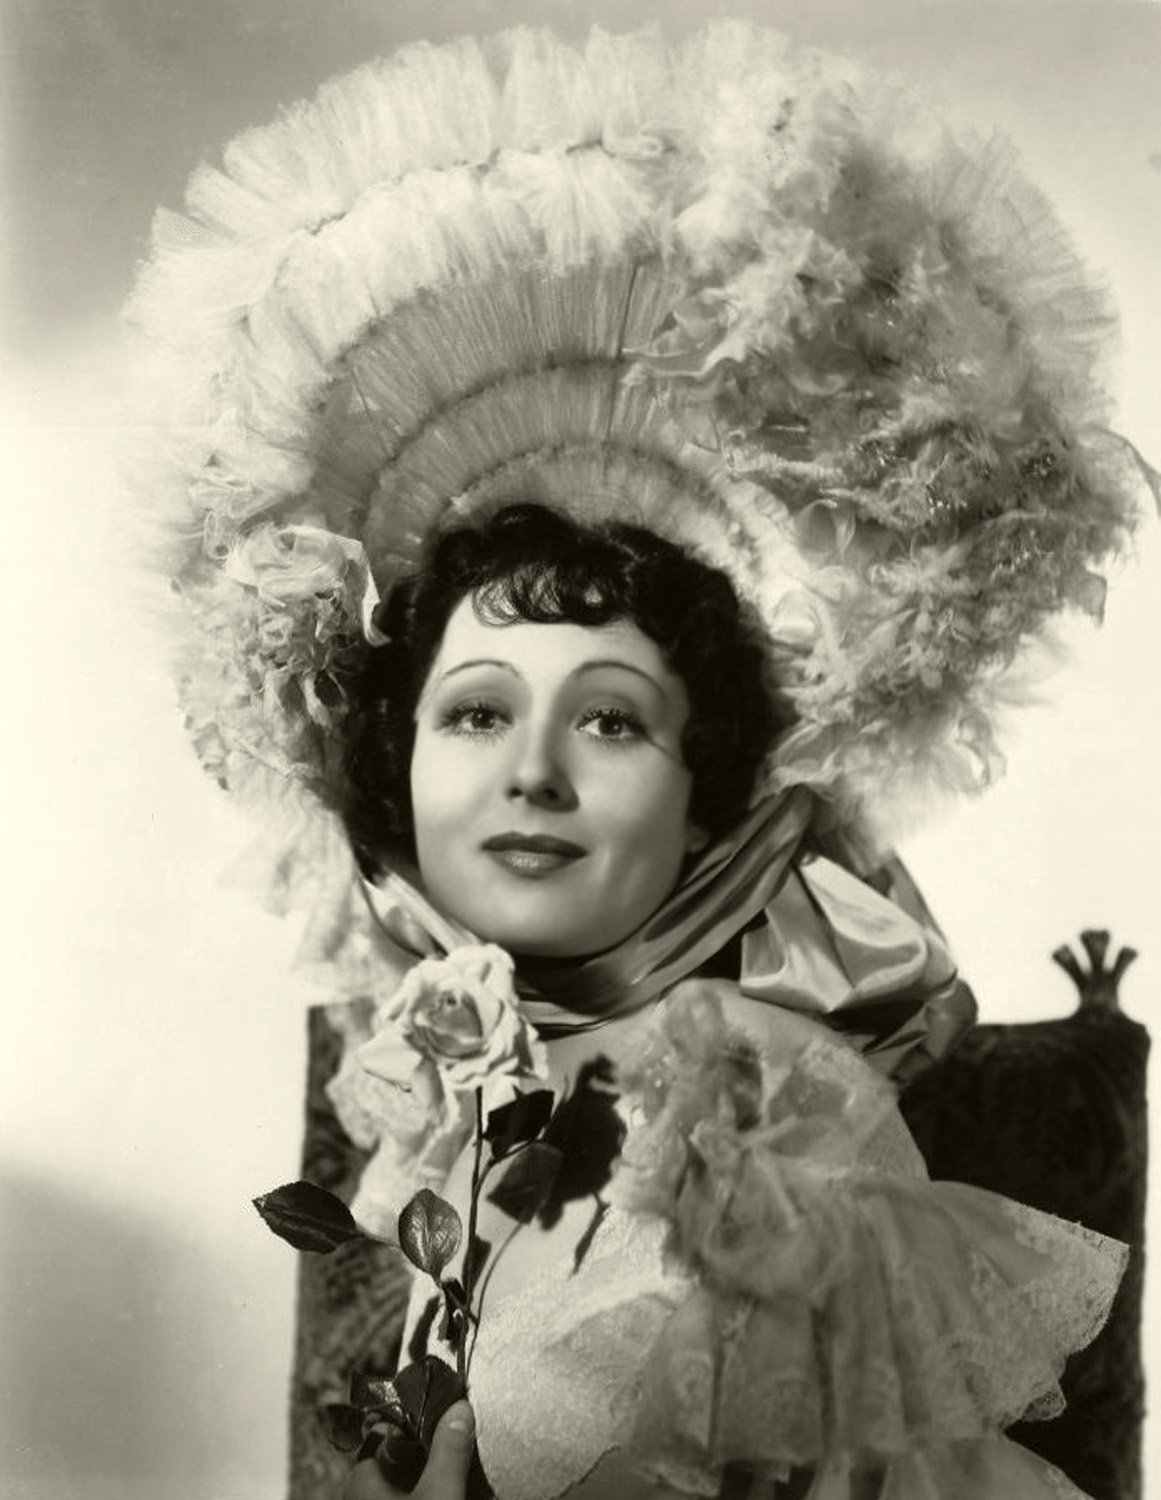 Luise Rainer, The Great Ziegfeld, By Ed Cronenwerth, 1936 - Luise Rainer, The Great Ziegfeld, By Ed Cronenwerth, 1936. FIRST ACTOR TO WIN BACK TO BACK OSCARS. Restored by jane for Dr. Macro's High Quality Movie Scans Website: http://www.doctormacro.com. Enjoy!